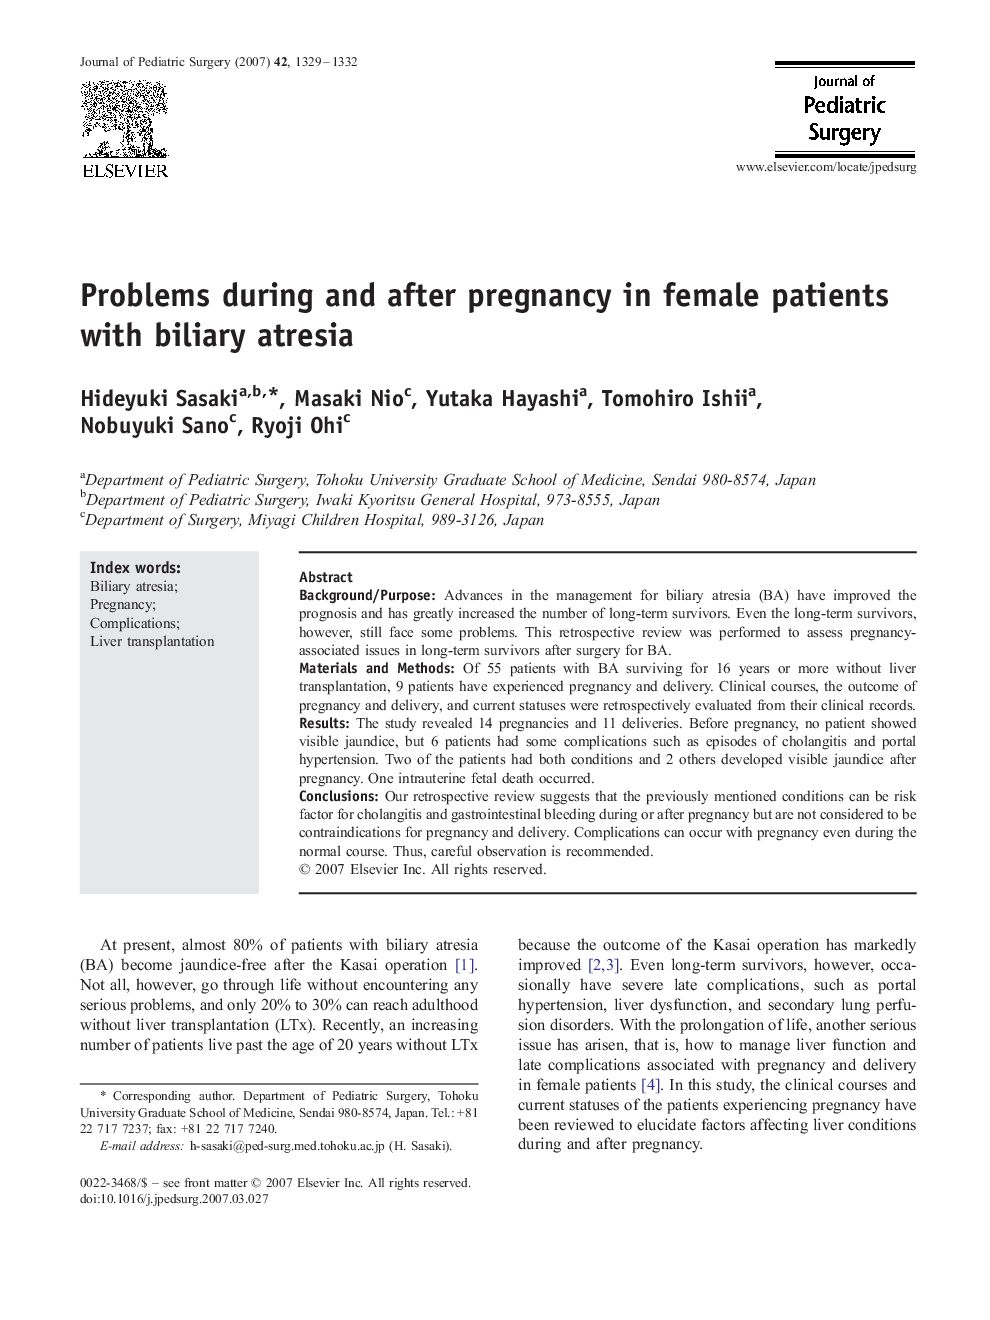 Problems during and after pregnancy in female patients with biliary atresia